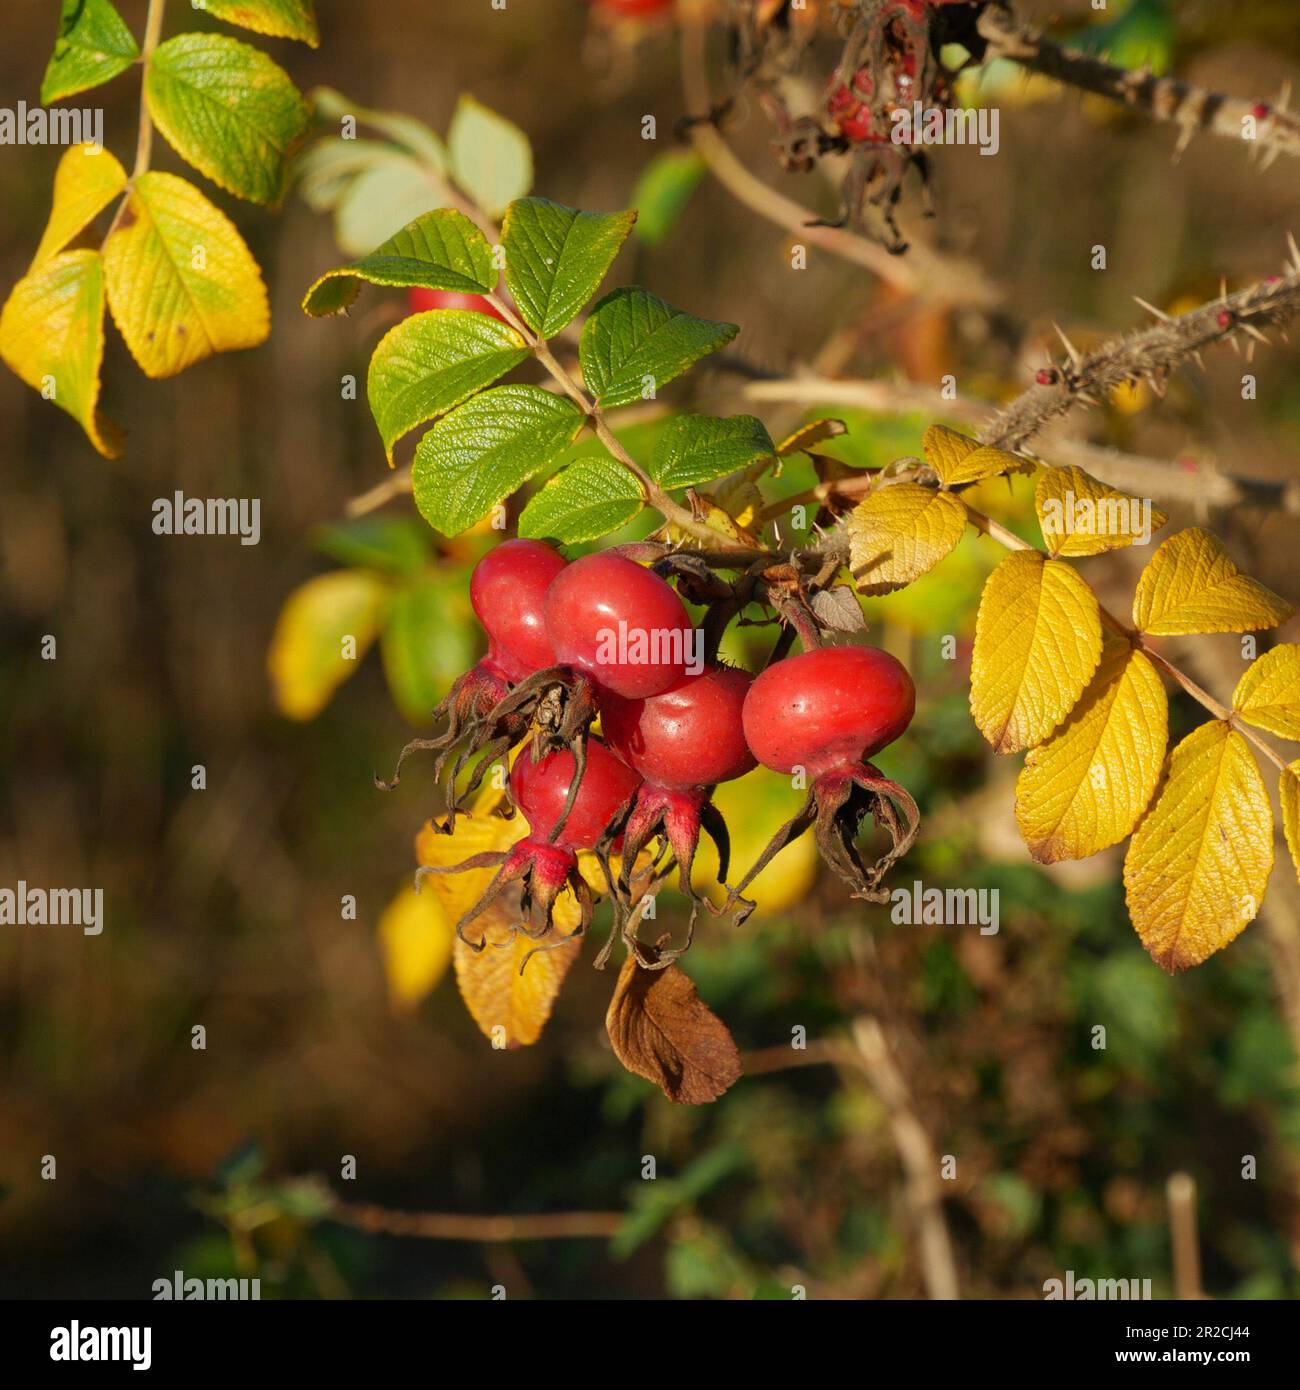 Close up of bright red rose hip berries and green leaves / foliage in Autumn, England, UK Stock Photo